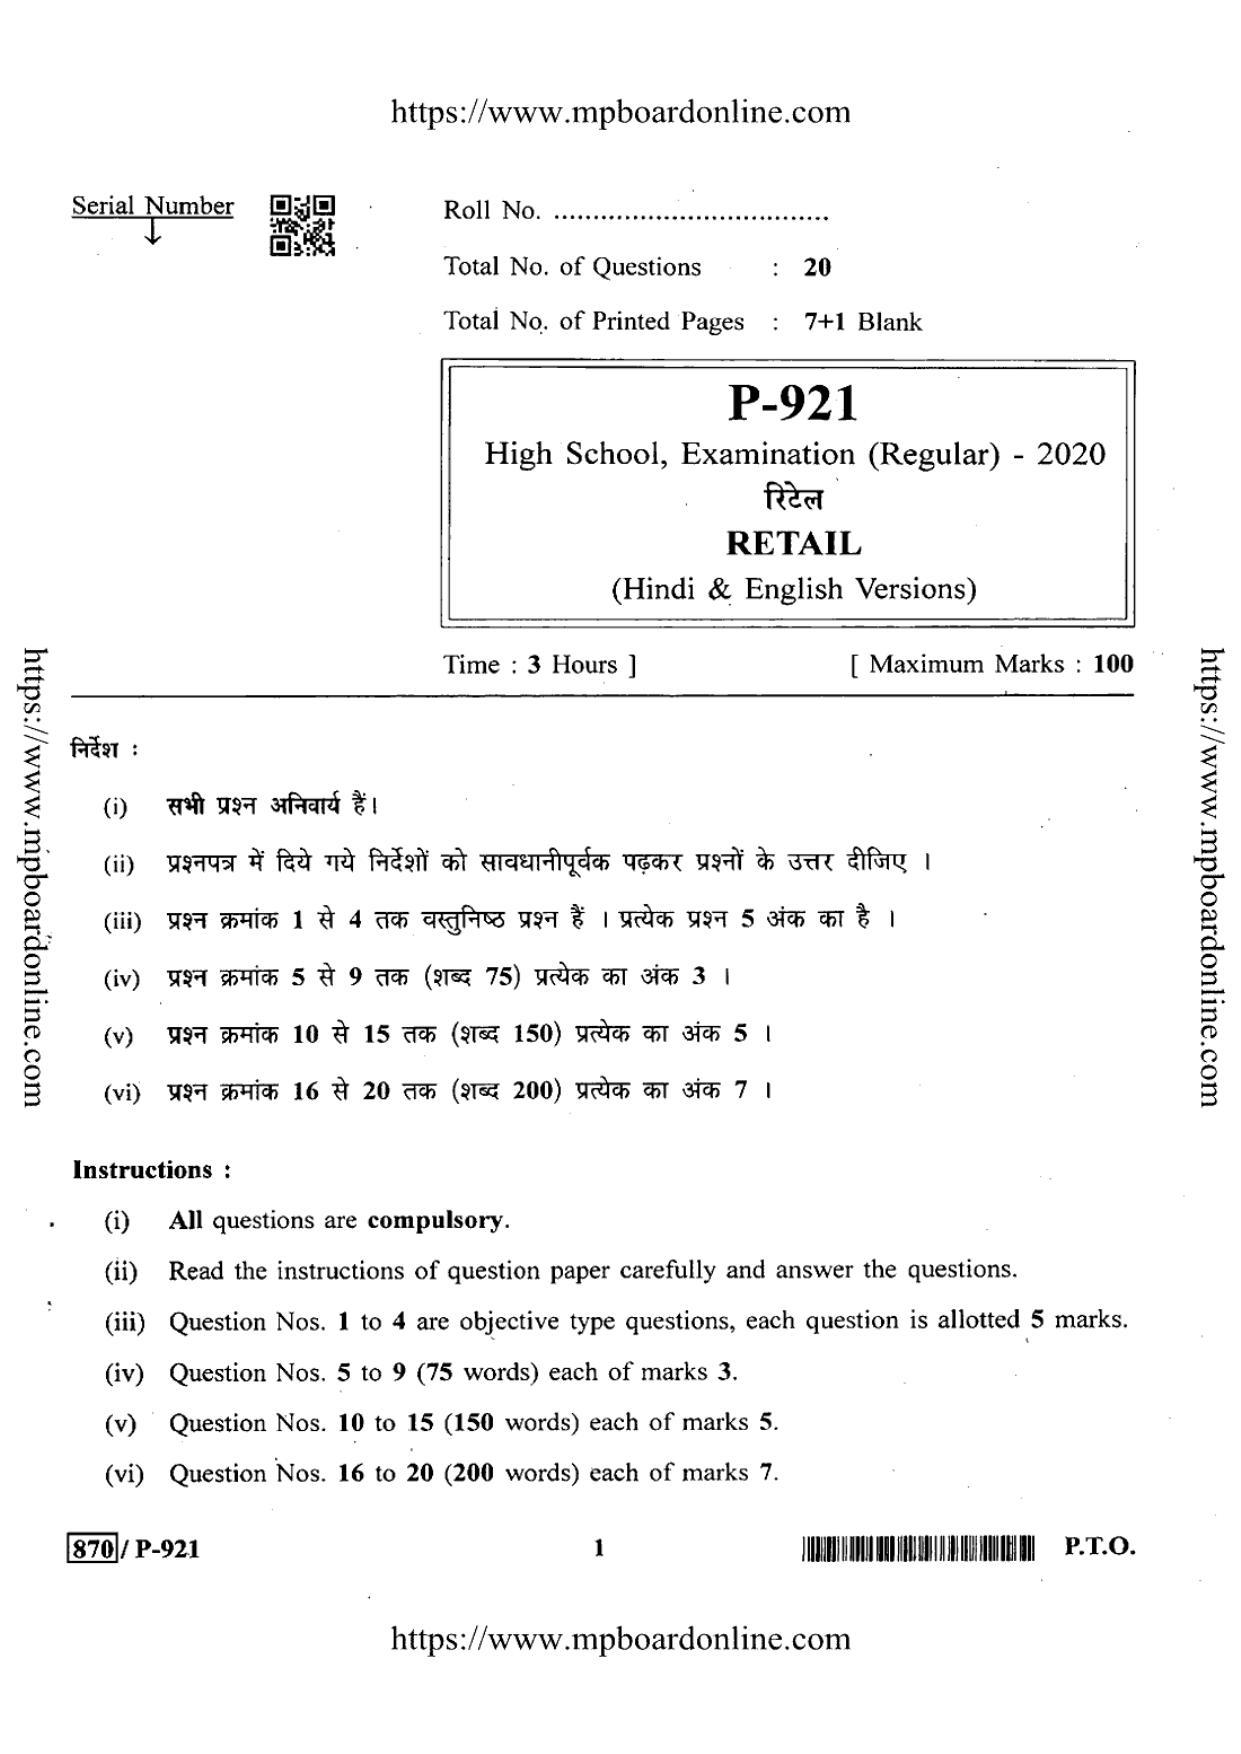 MP Board Class 10 Retail 2020 Question Paper - Page 1